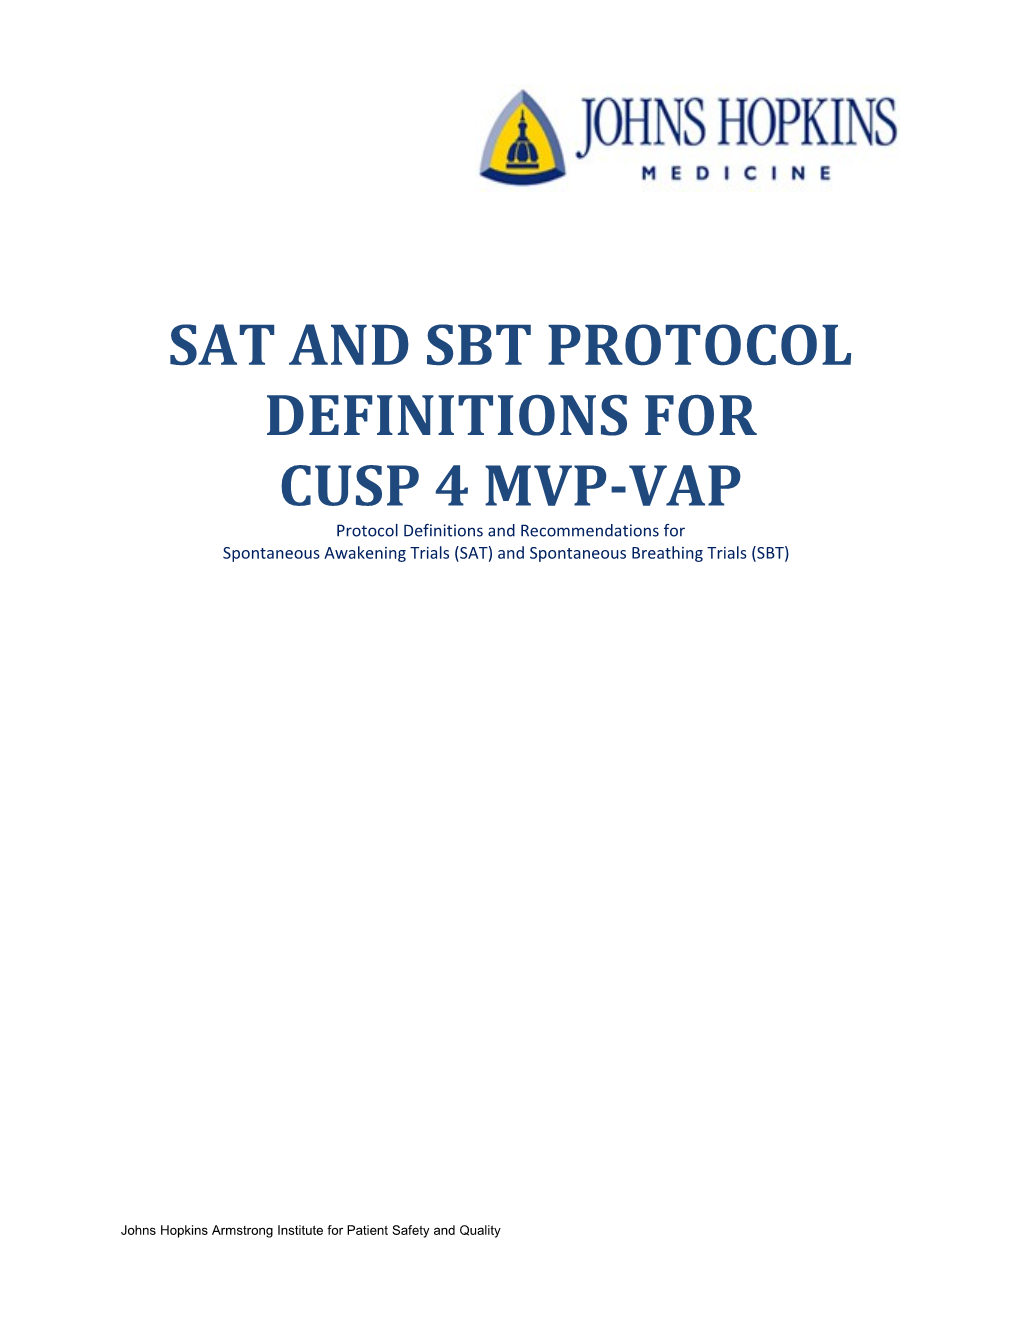 SAT and SBT Protocol Definitions for Cusp 4 MVP-VAP